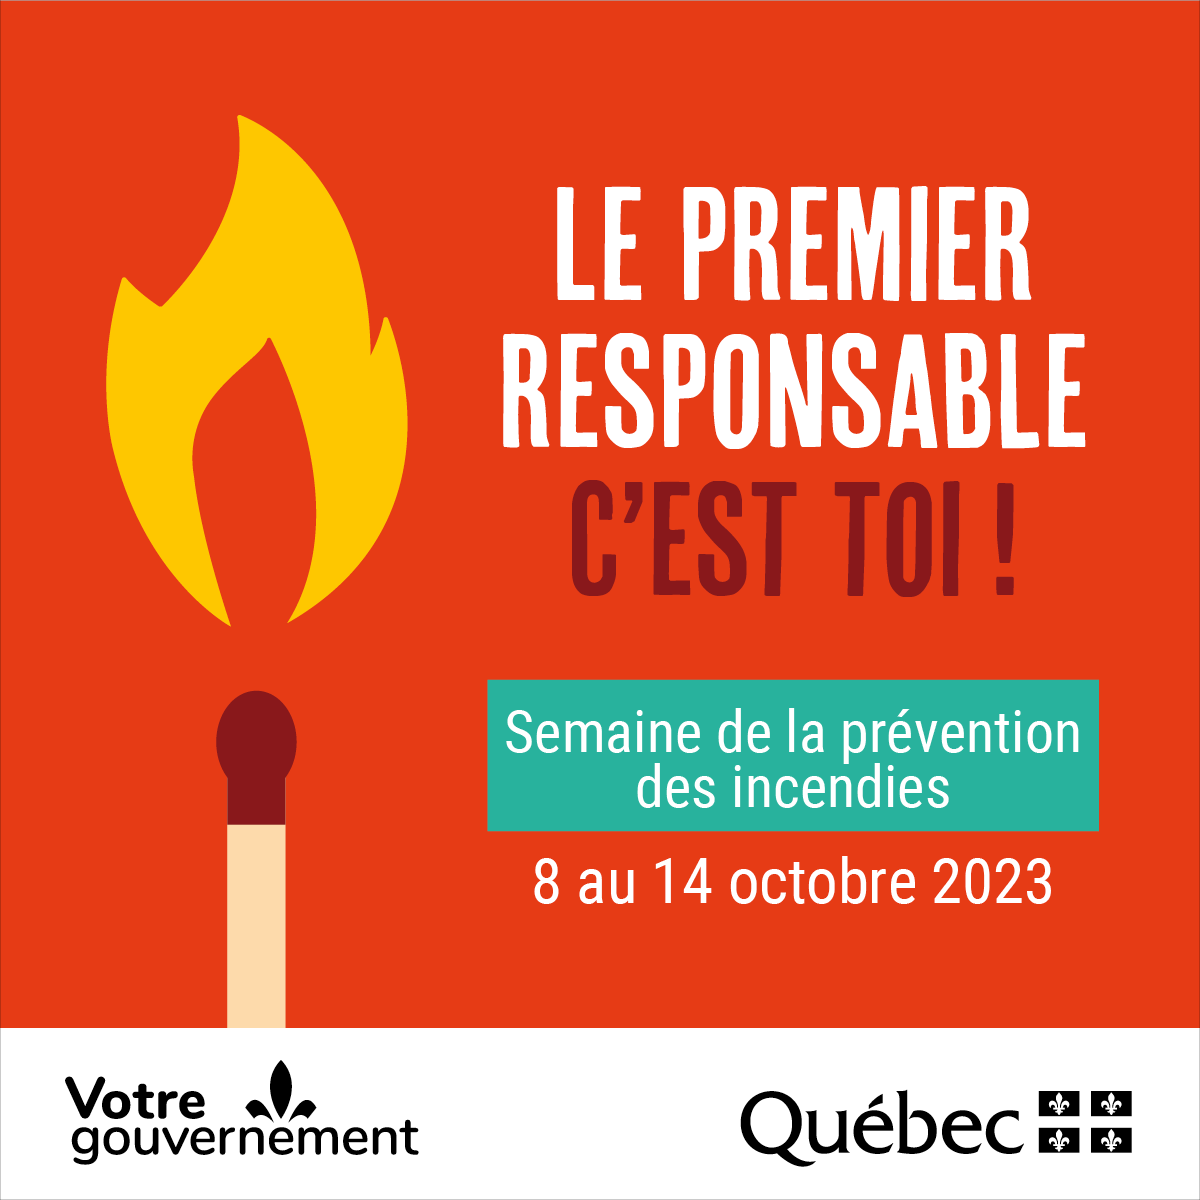 Semaine_prevention_incendie_2023.png (65 KB)